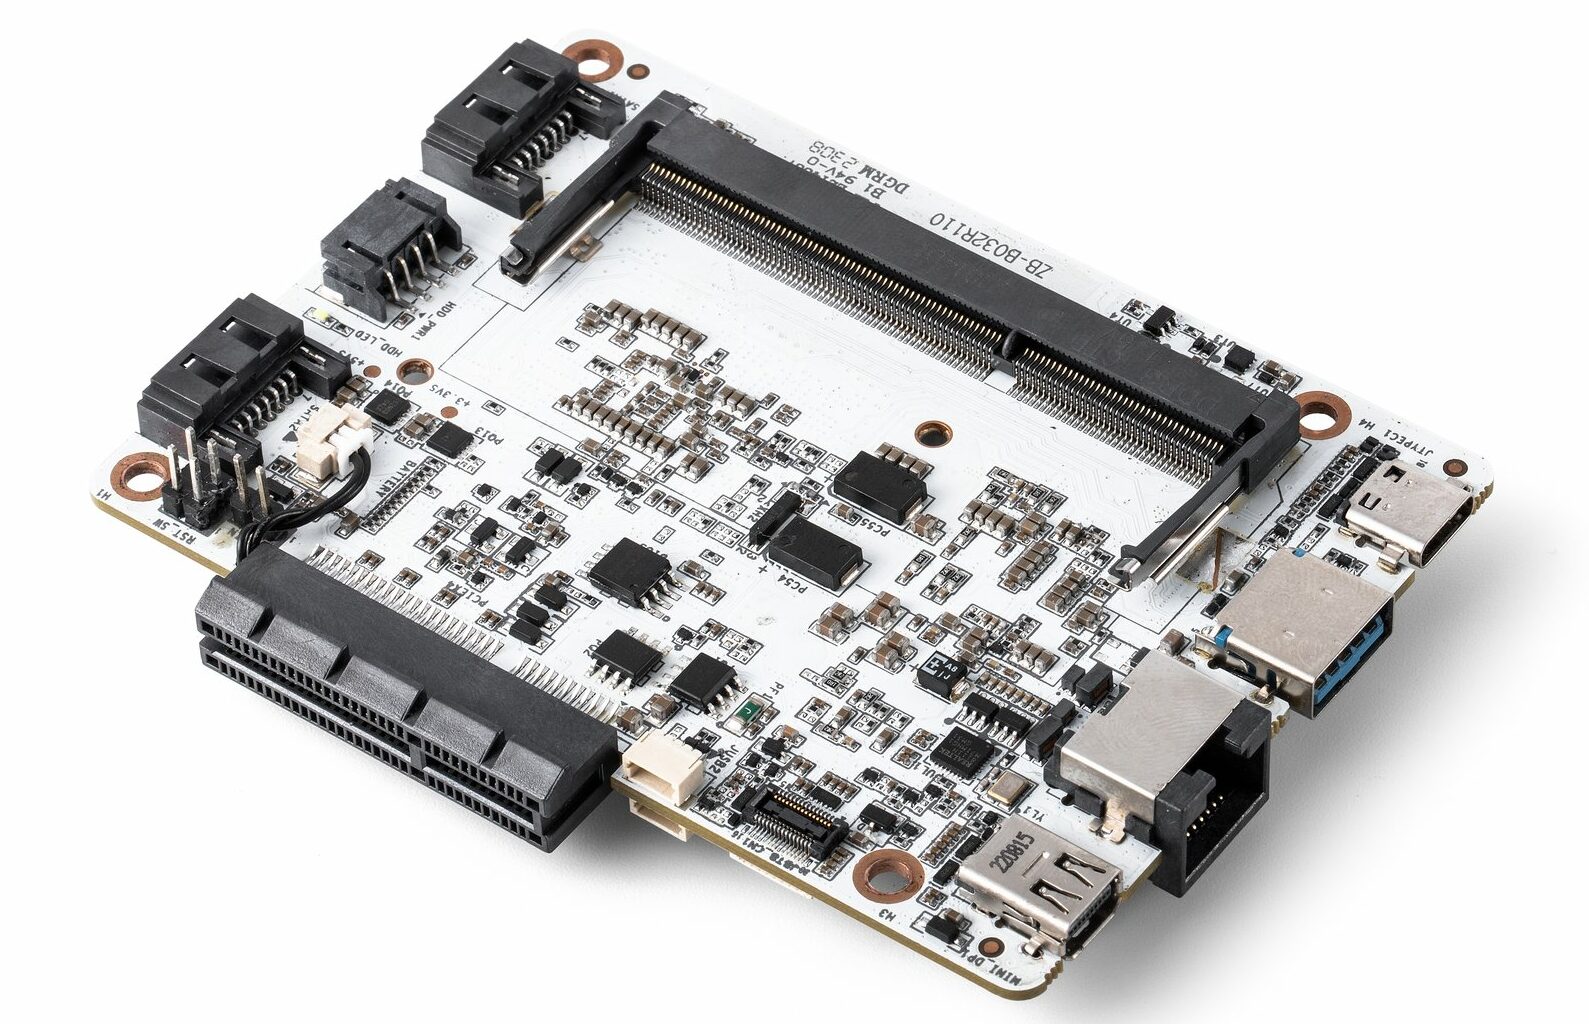 CrowdSupply features ZimaBlade – A SBC for Personal Servers, Media Streaming, and Retro Gaming